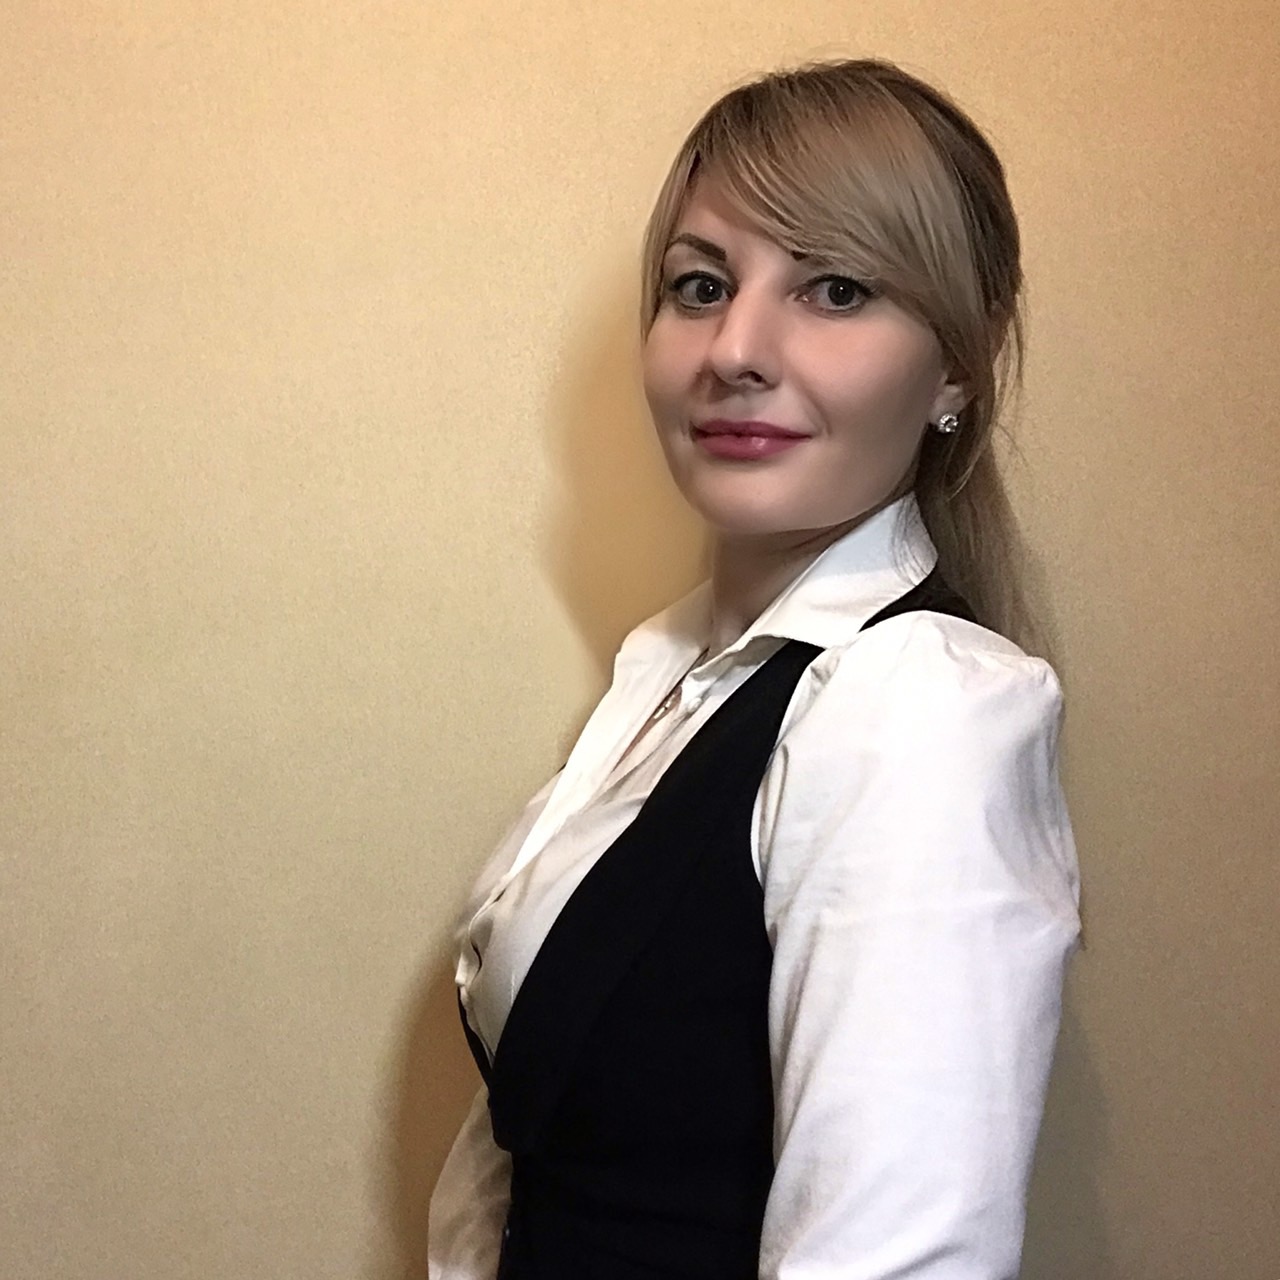 We welcome Olena Sulim to our team